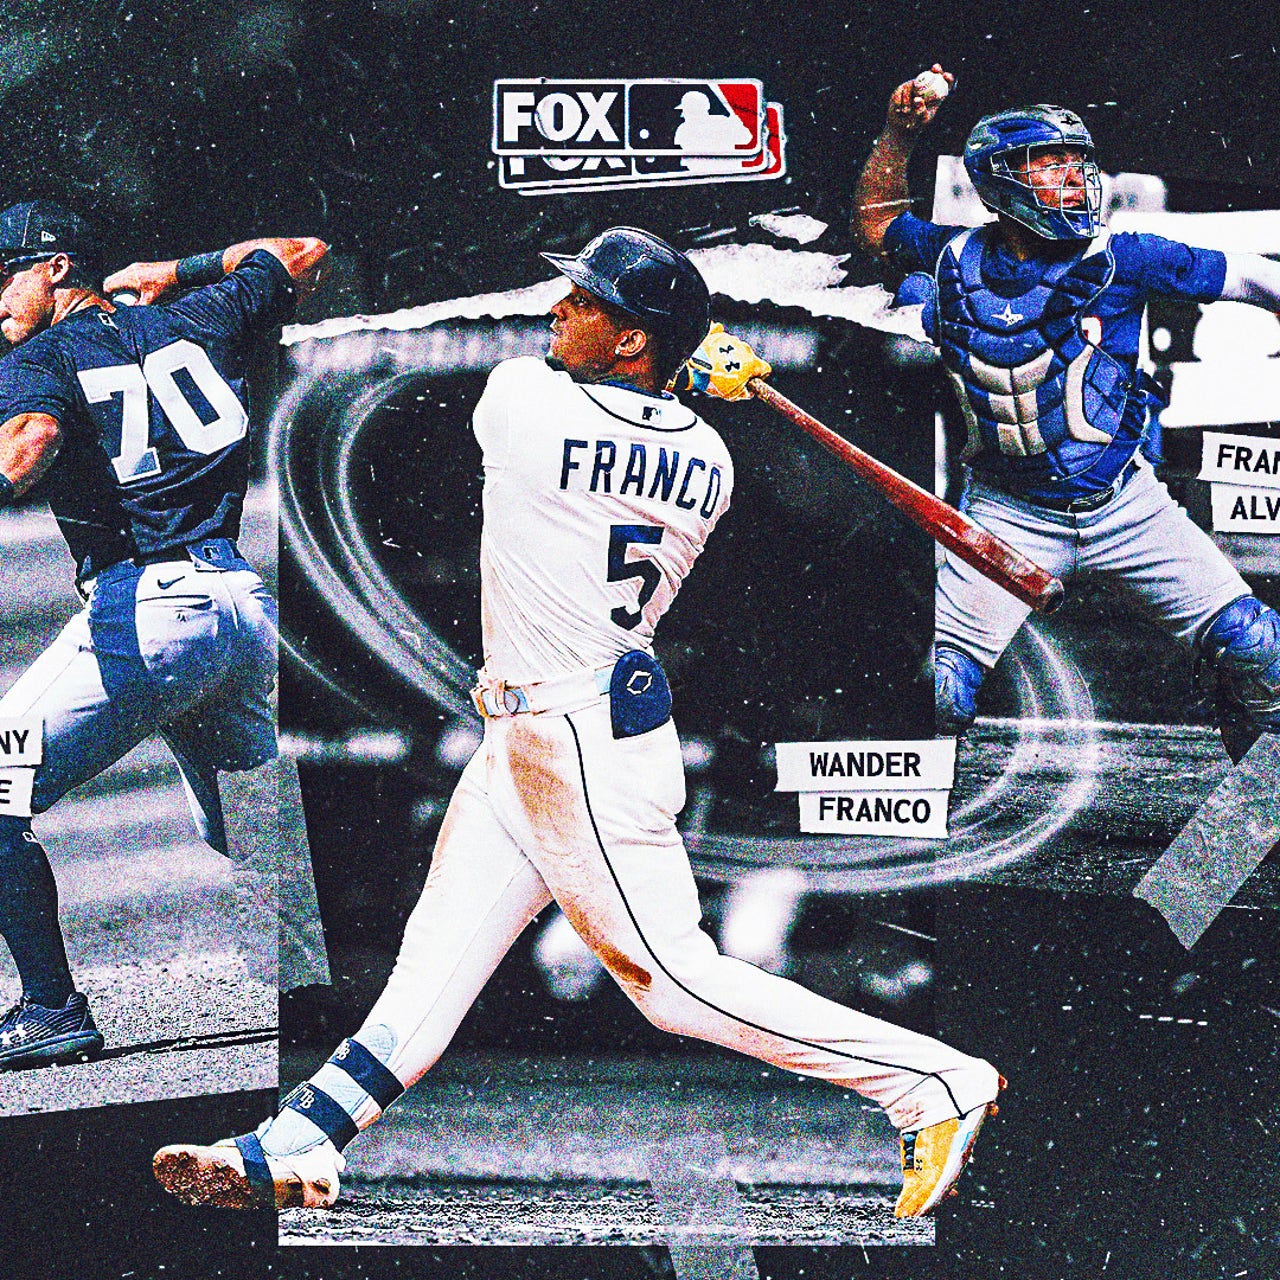 Who could supplant Wander Franco as MLB's youngest player?